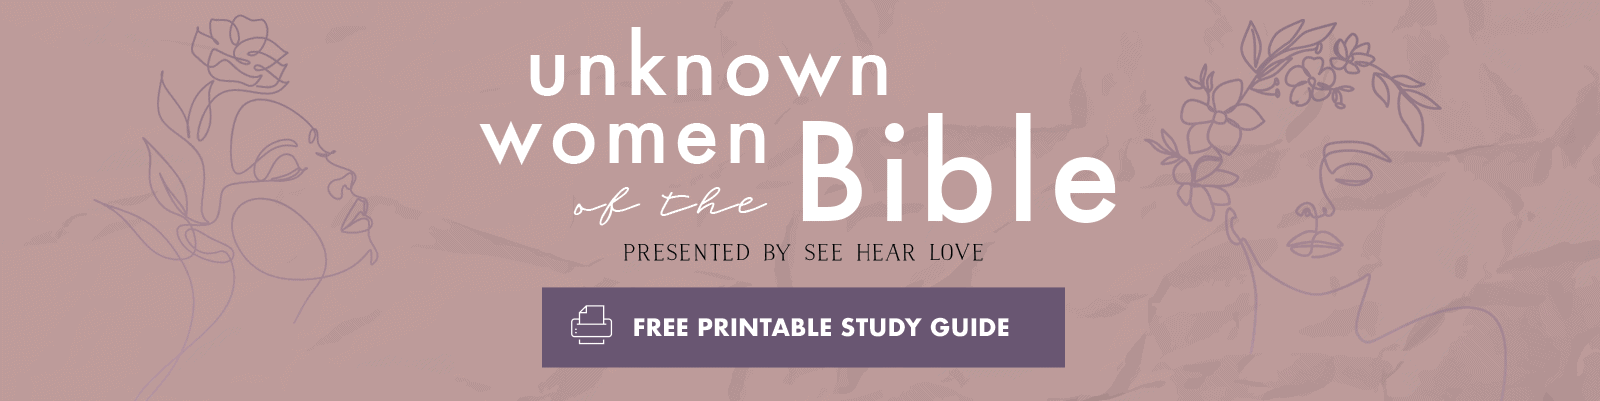 Unknown Women in the Bible study